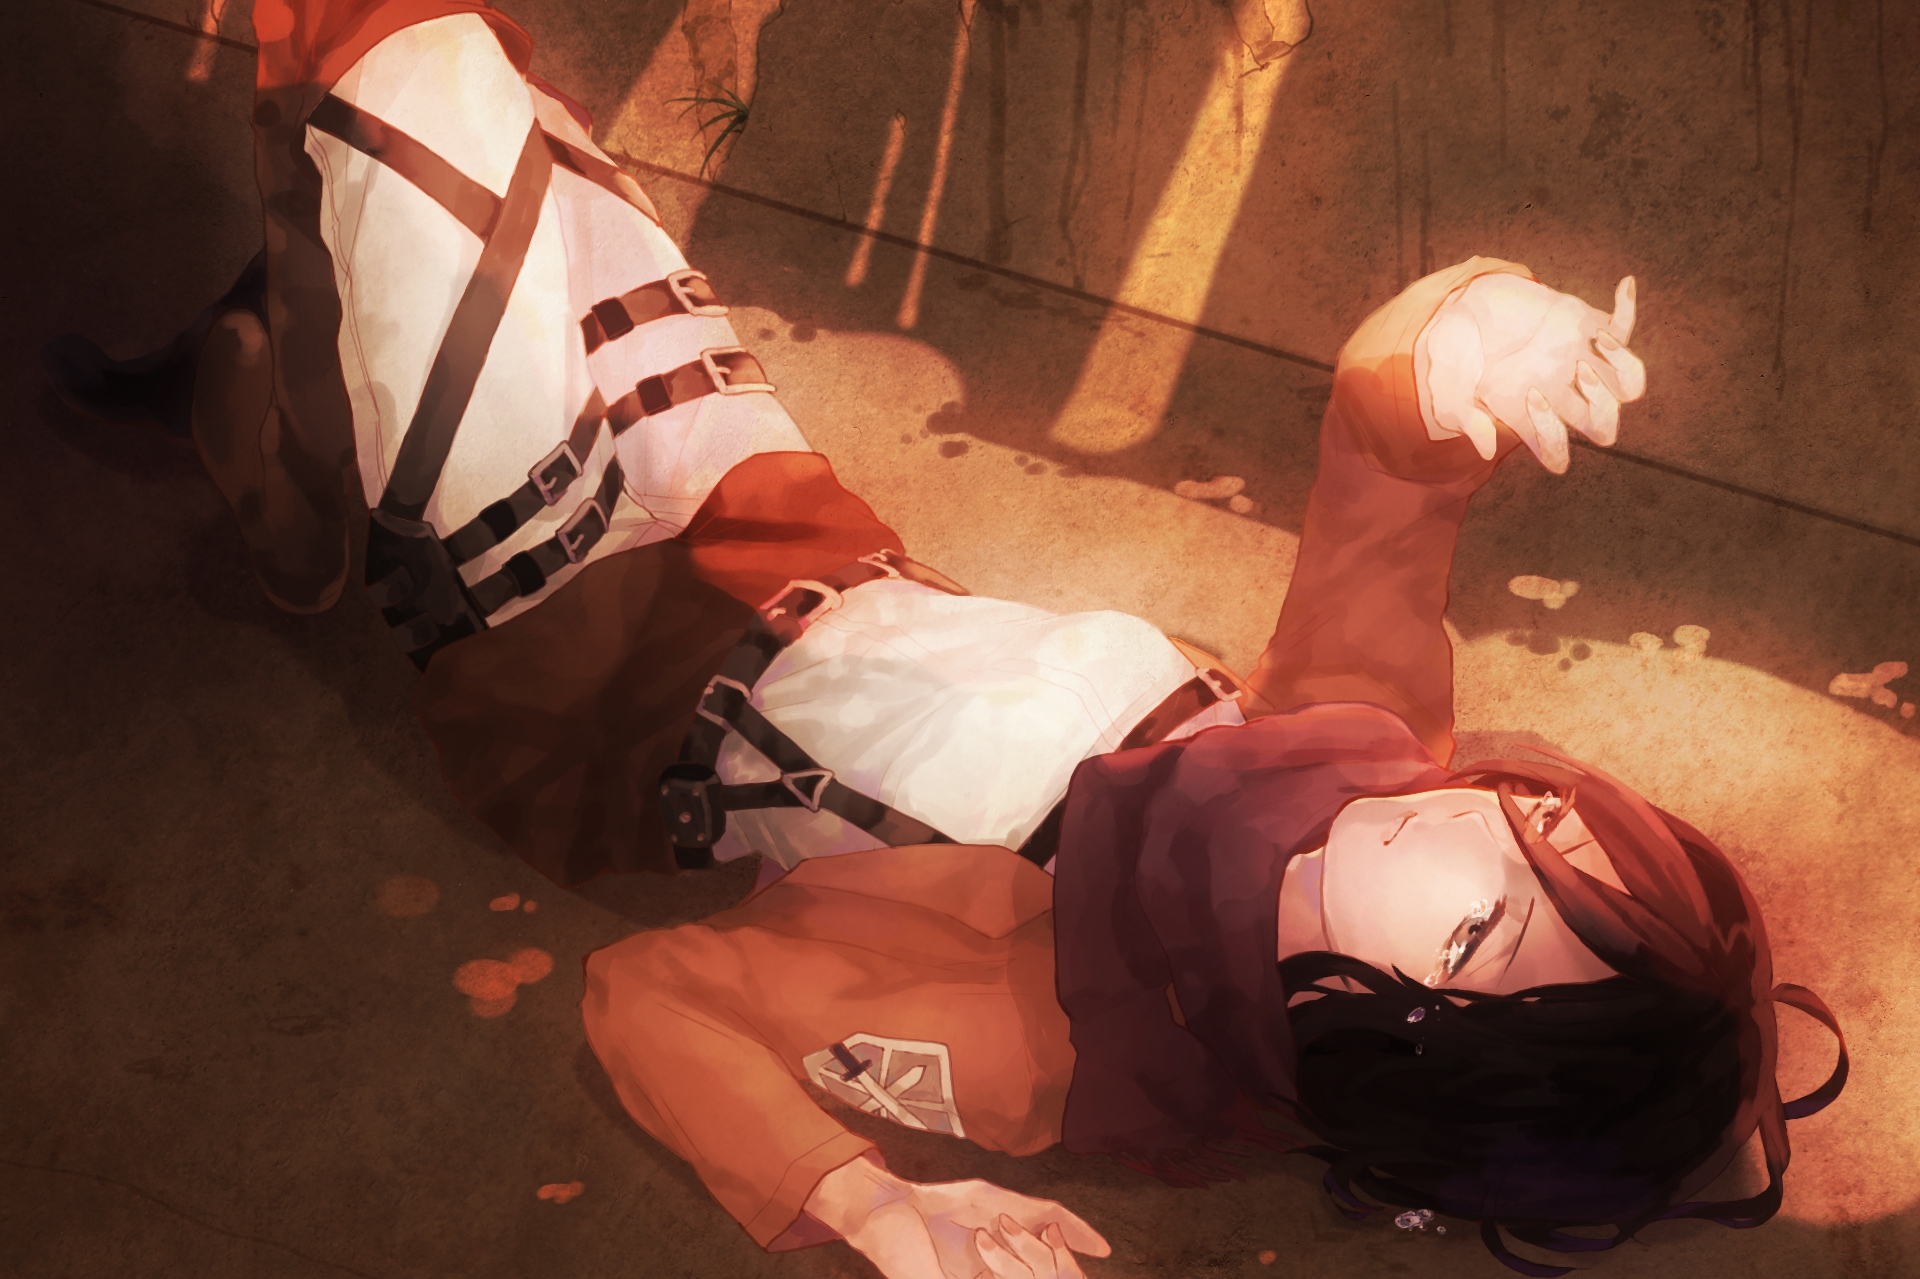 2200+ Anime Attack On Titan HD Wallpapers and Backgrounds